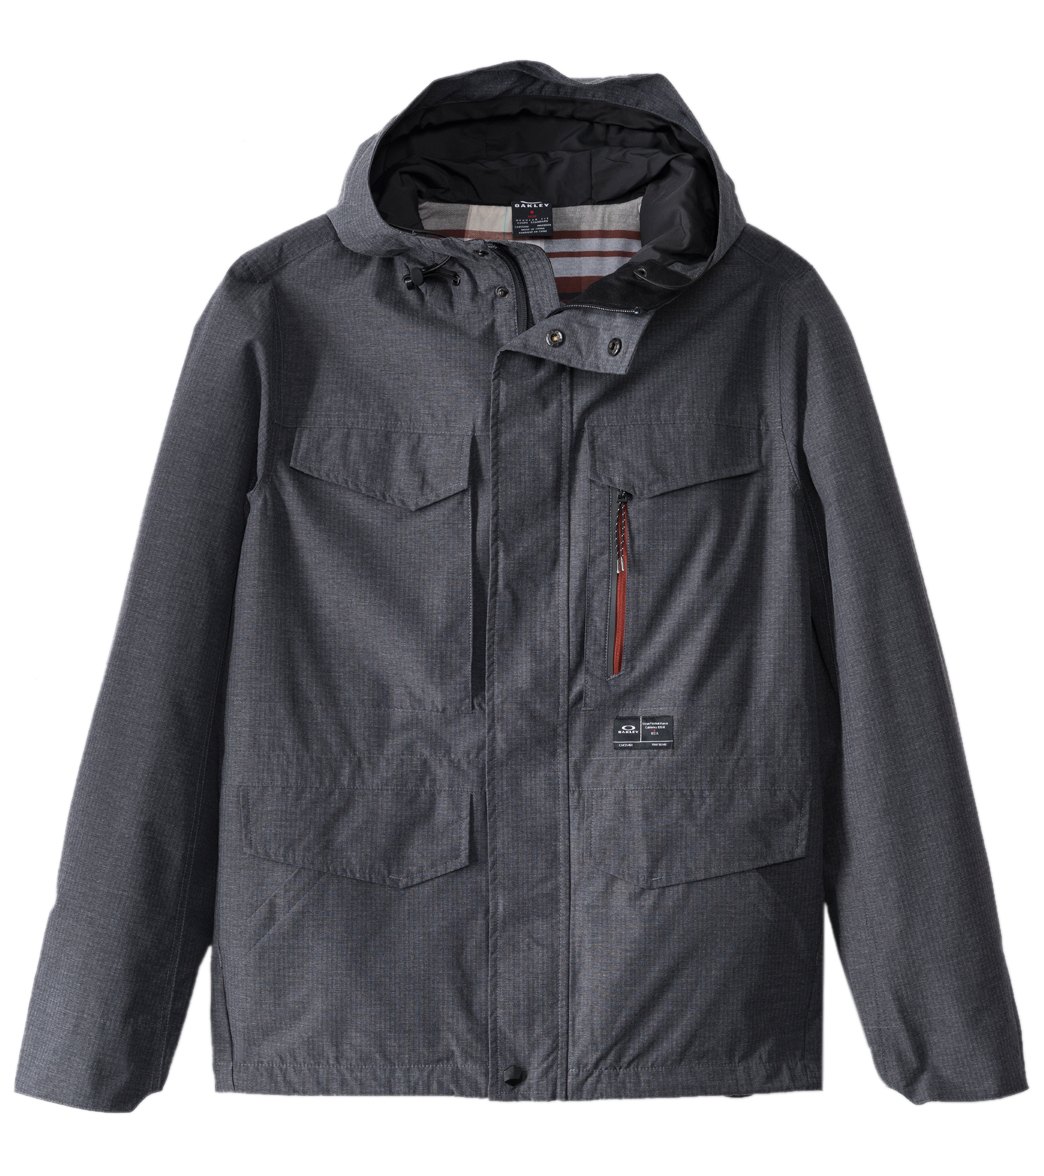 Oakley Men's Infantry Jacket at SwimOutlet.com - Free Shipping